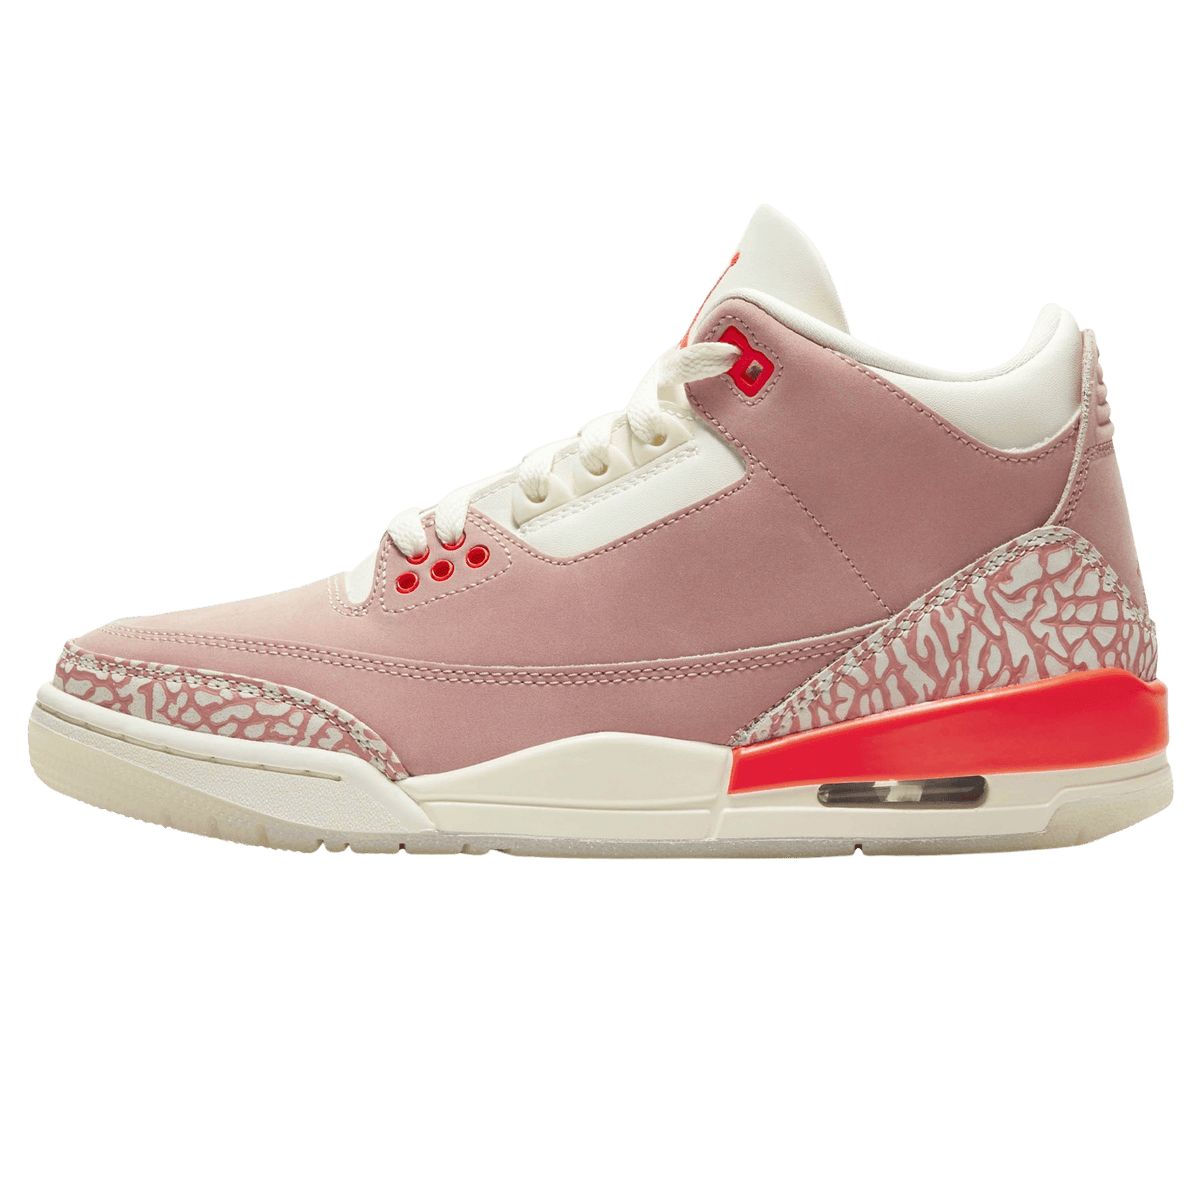 You may recall rare PE that surfaced earlier week during Jordan Brands Retro Wmns 'Rust Pink' - CerbeShops